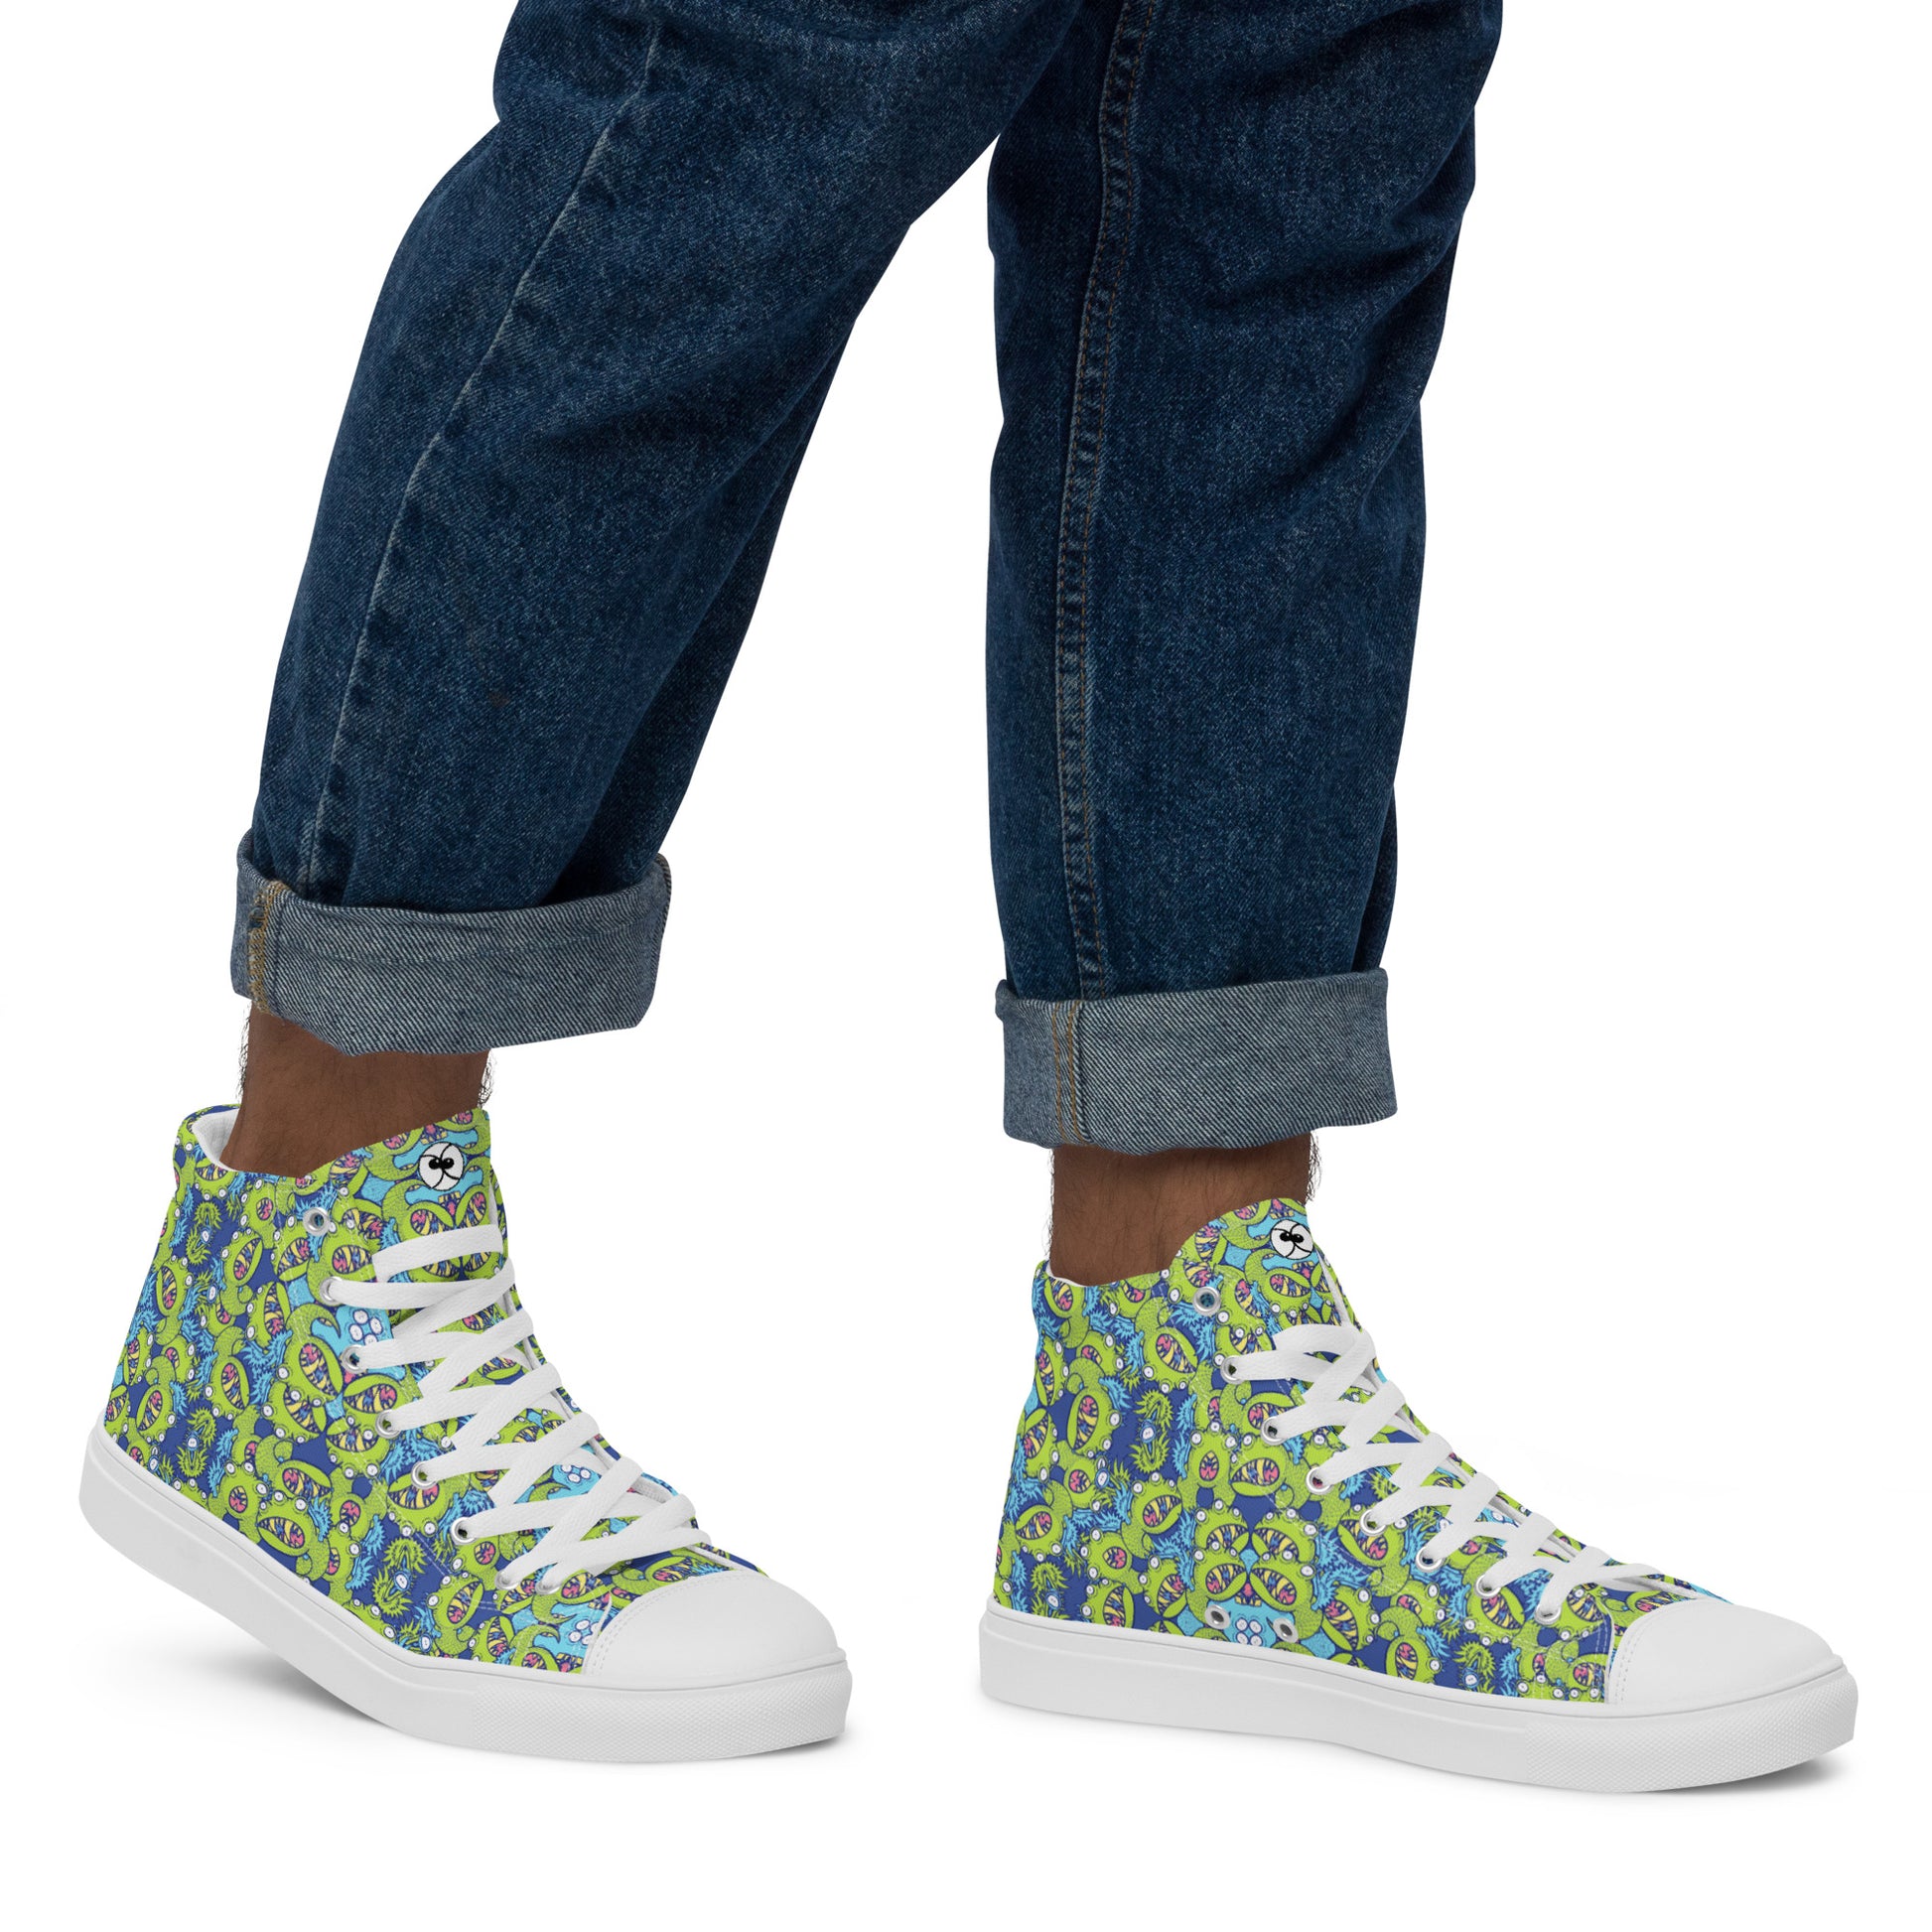 Winged little blue monster pattern art Men’s high top canvas shoes. Lifestyle